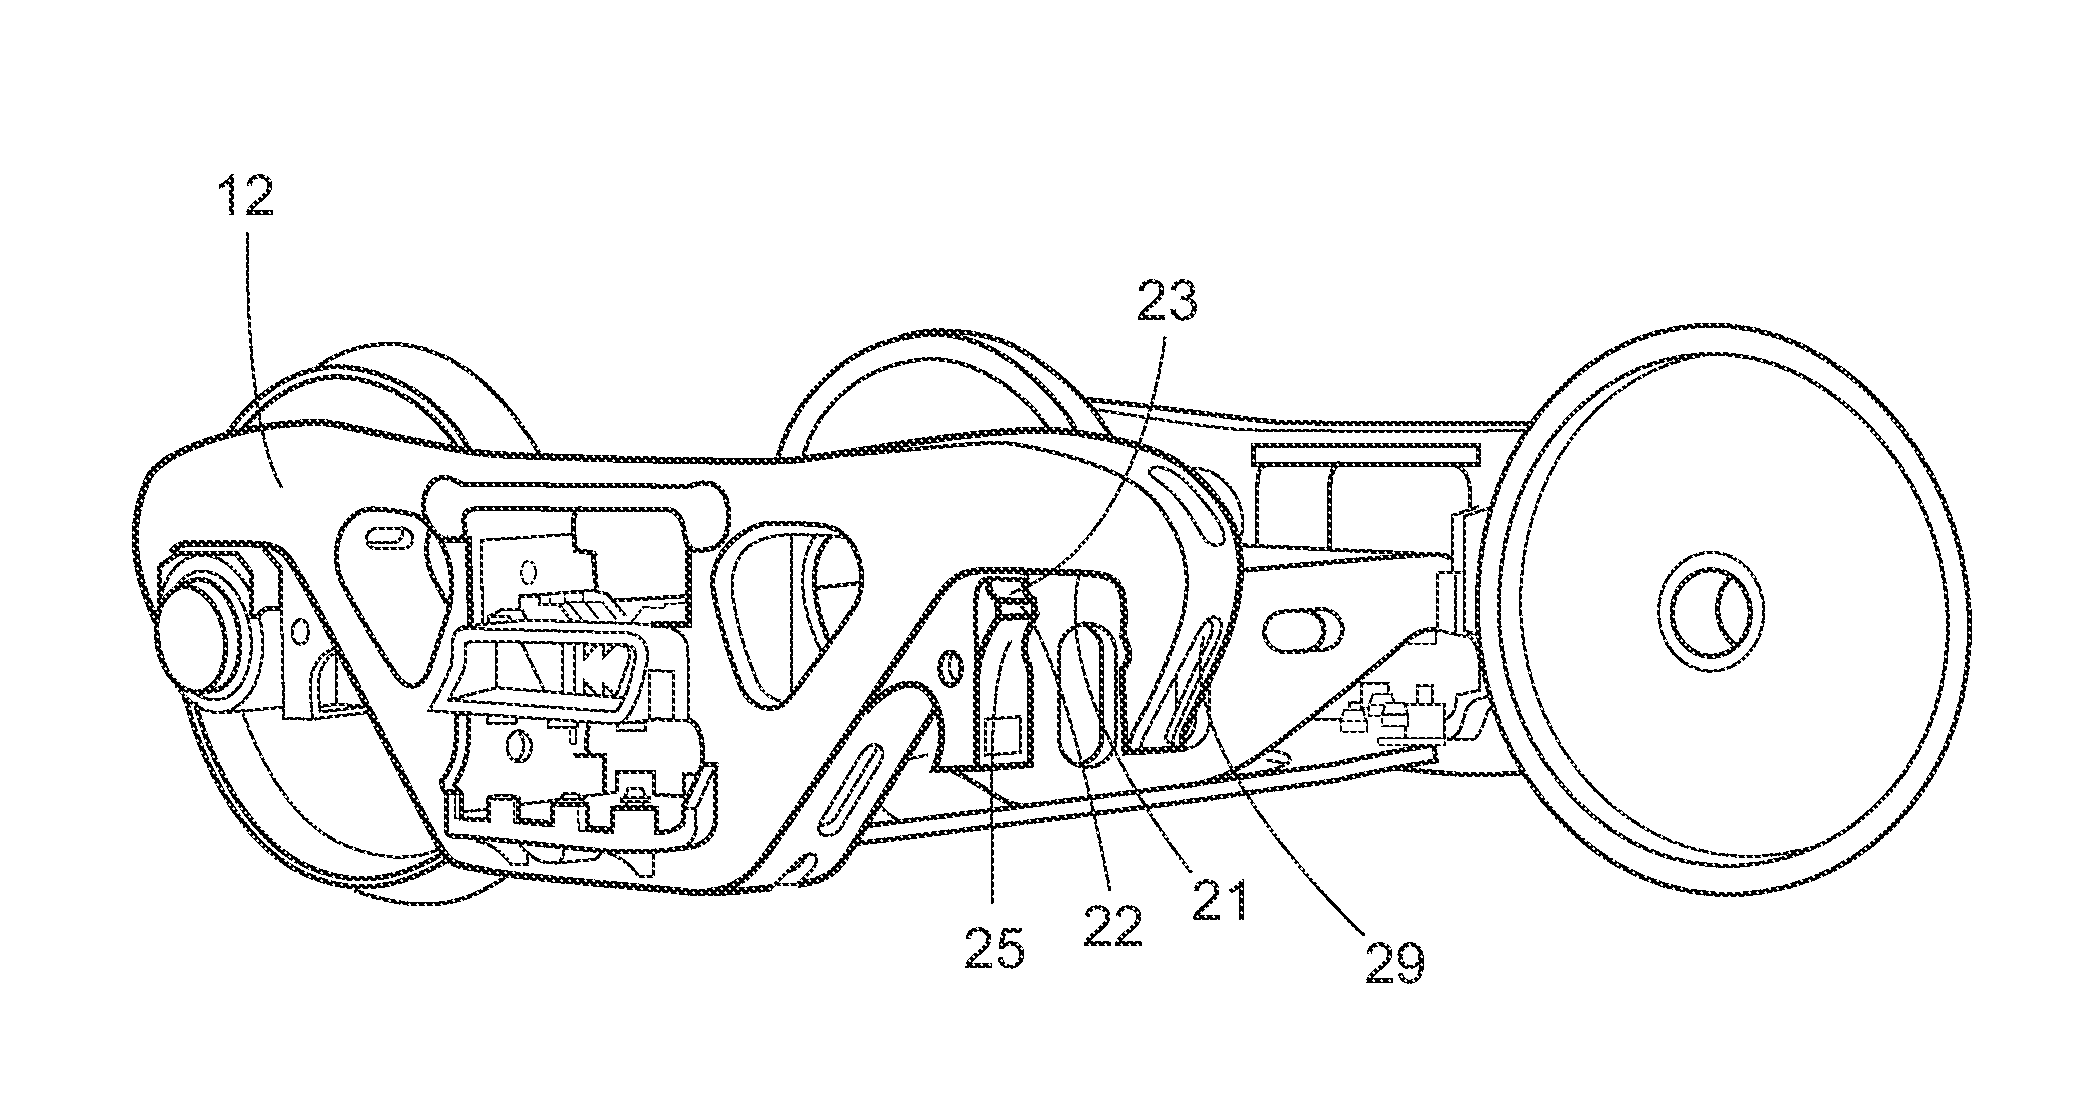 Wheelset to side frame interconnection for a railway car truck